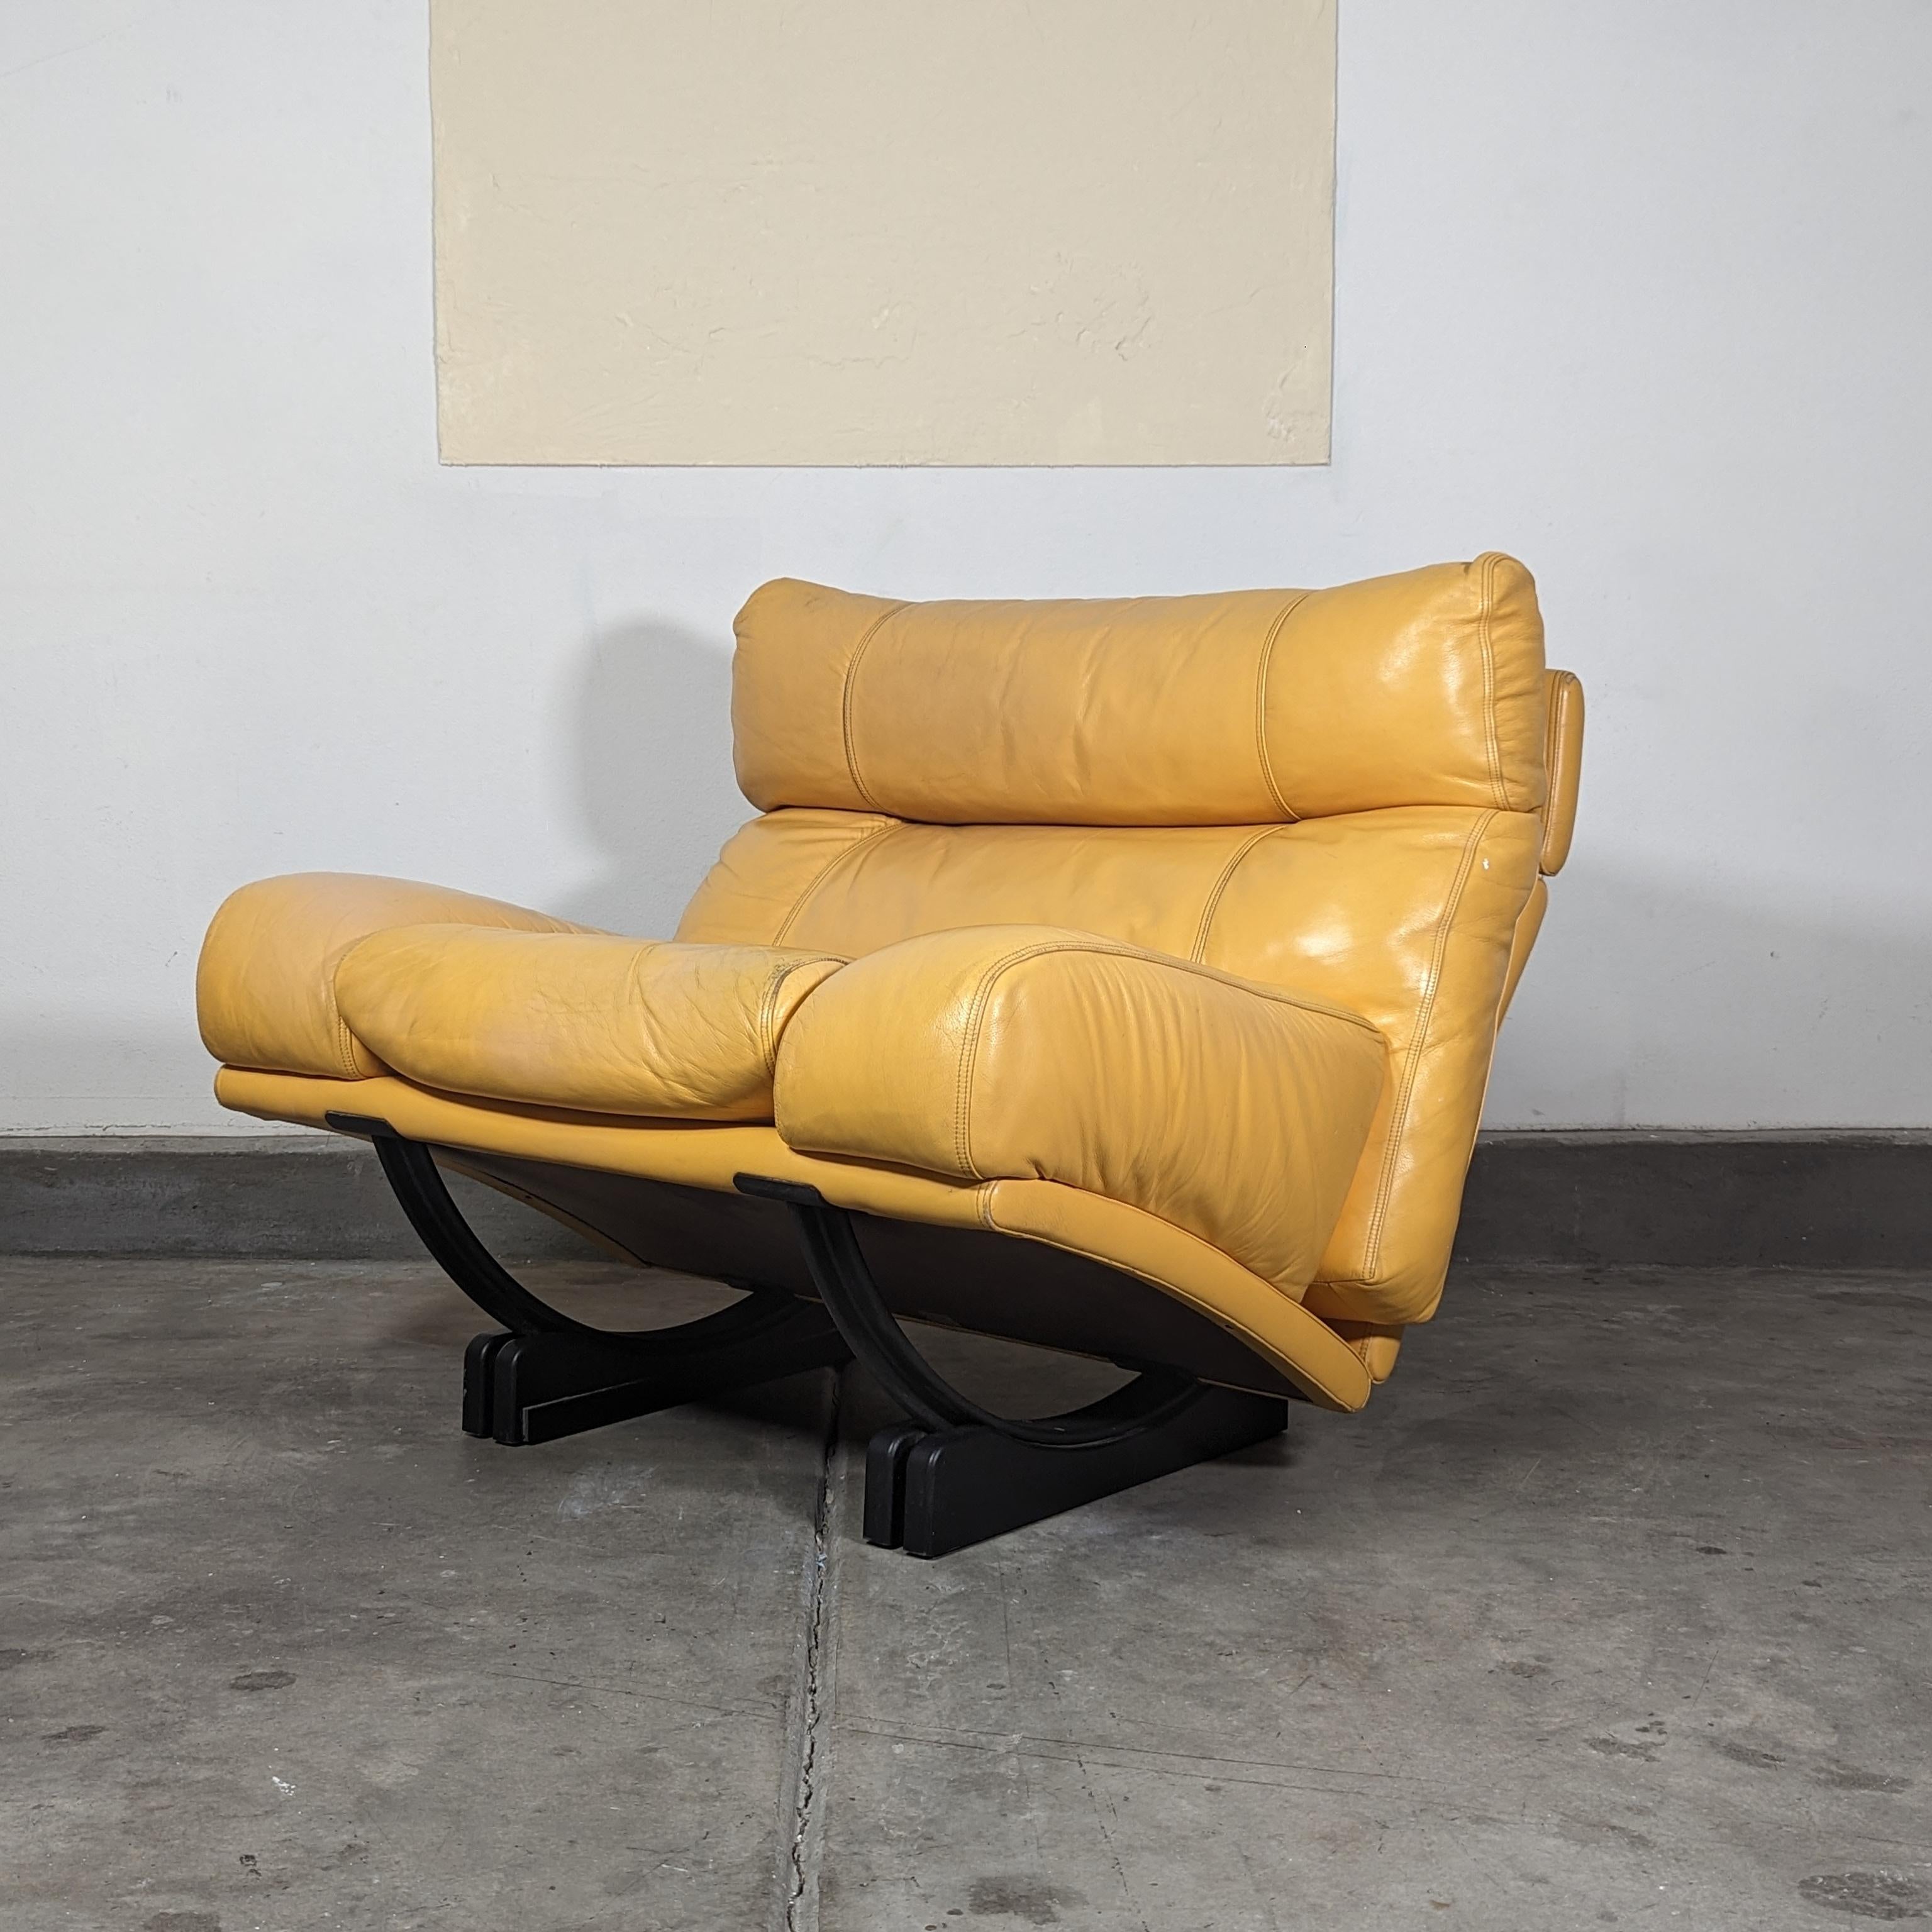 Postmodern Walse Leather Lounge Chair by Tito Agnoli for Poltrona Frau, c1990s For Sale 4